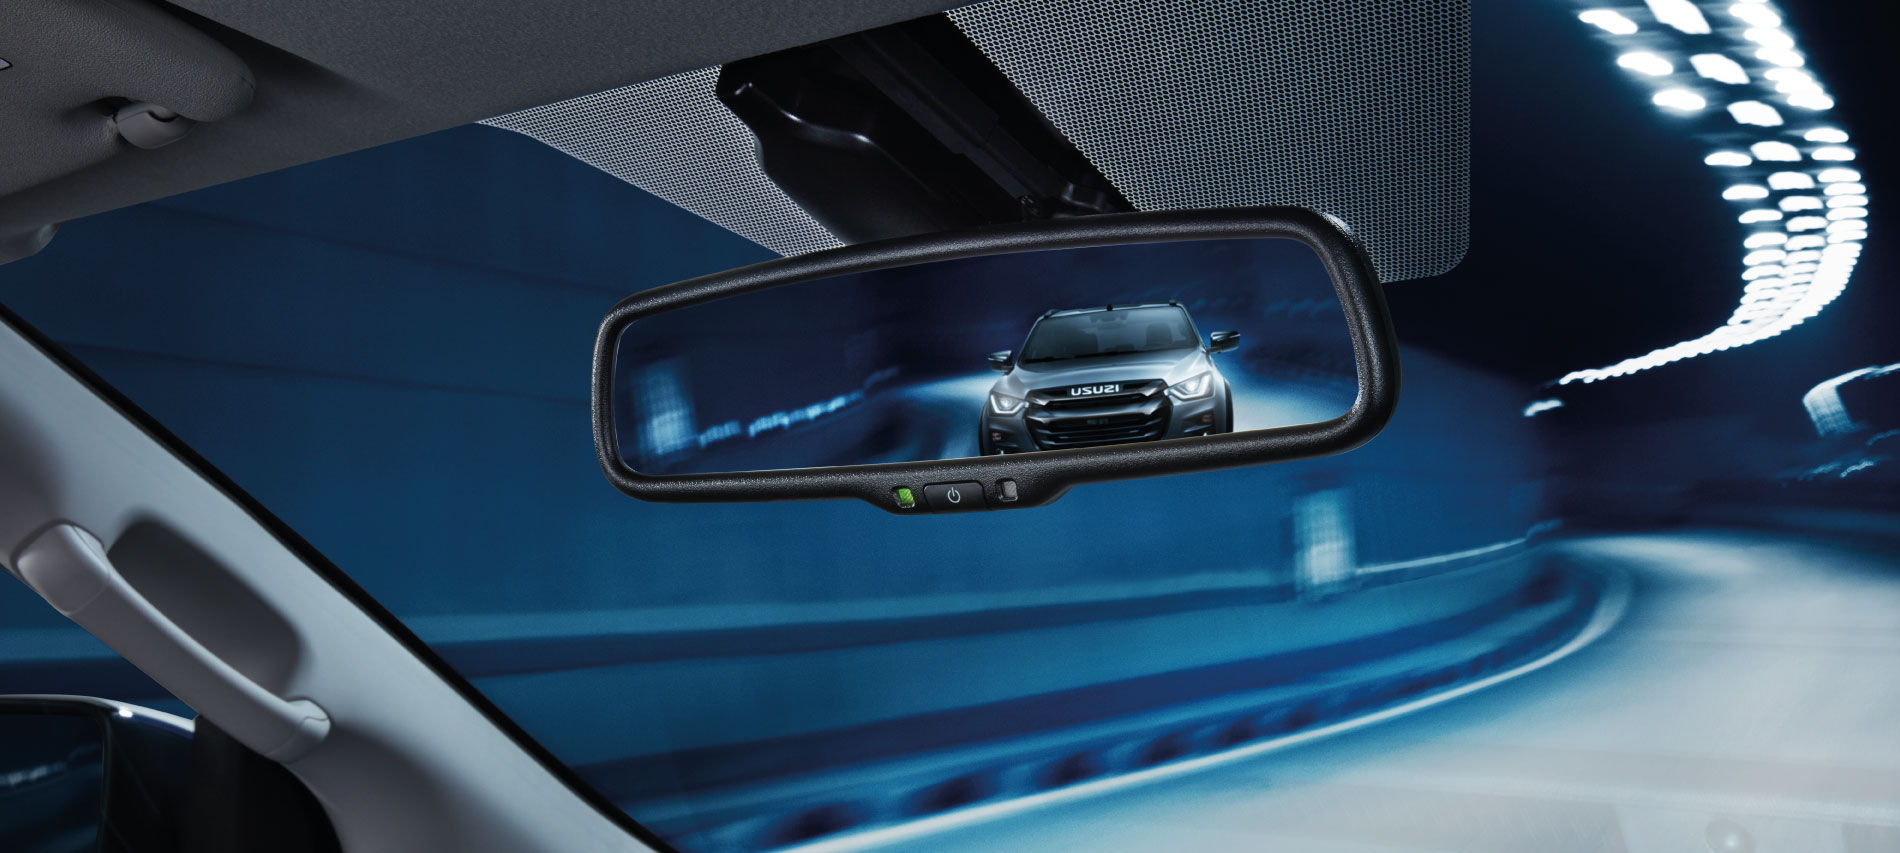 AUTO DIMMING REAR VIEW MIRROR